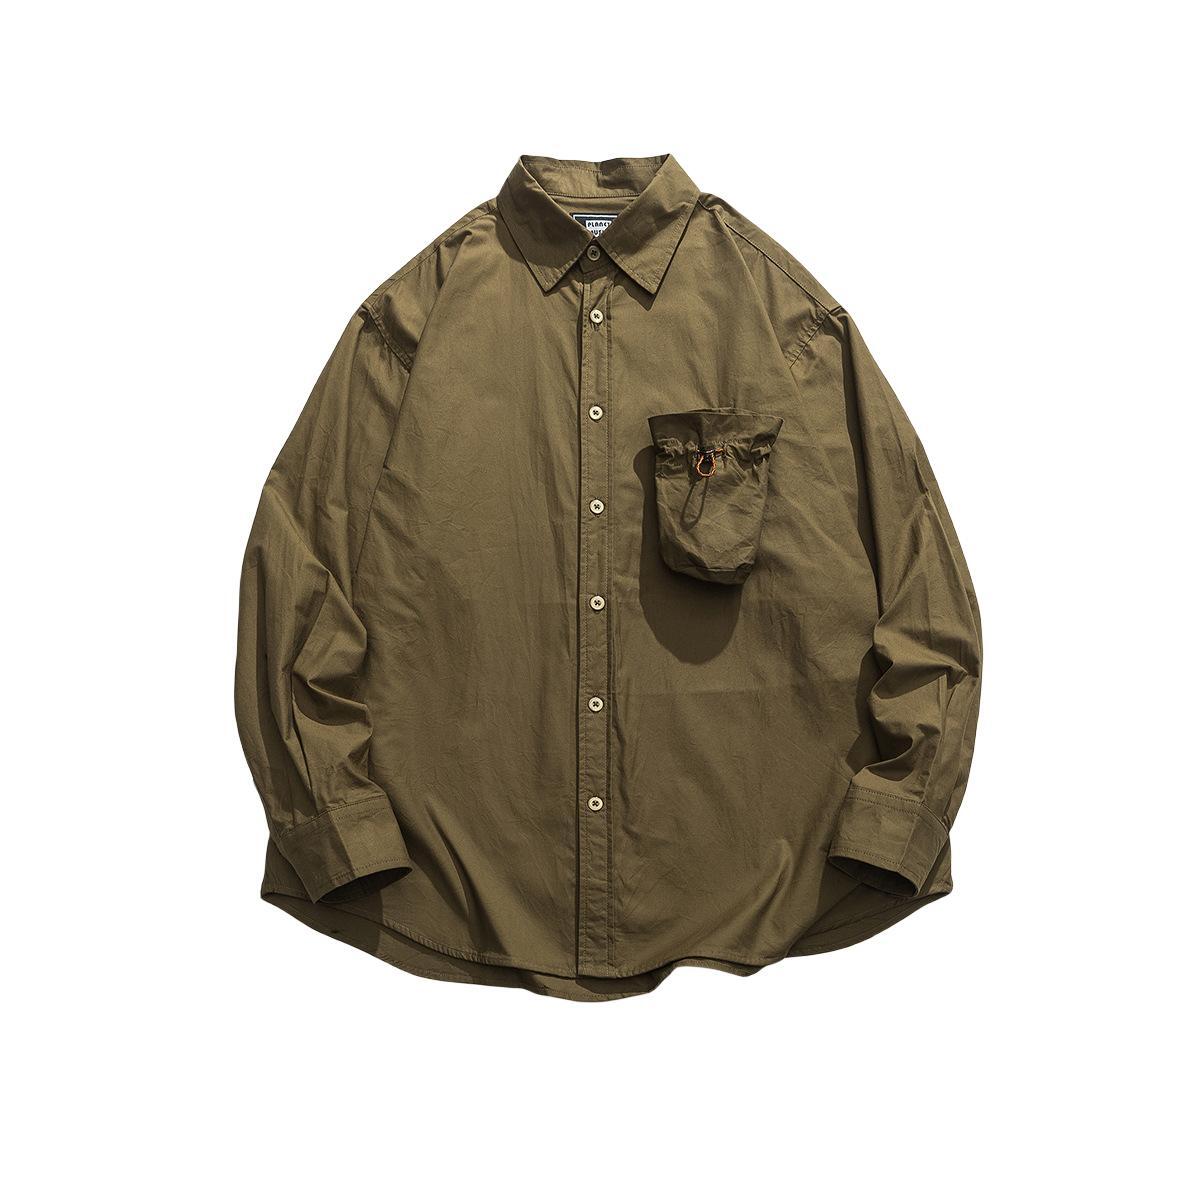 Essential Cotton Utility Overshirt with Drawstring Pocket